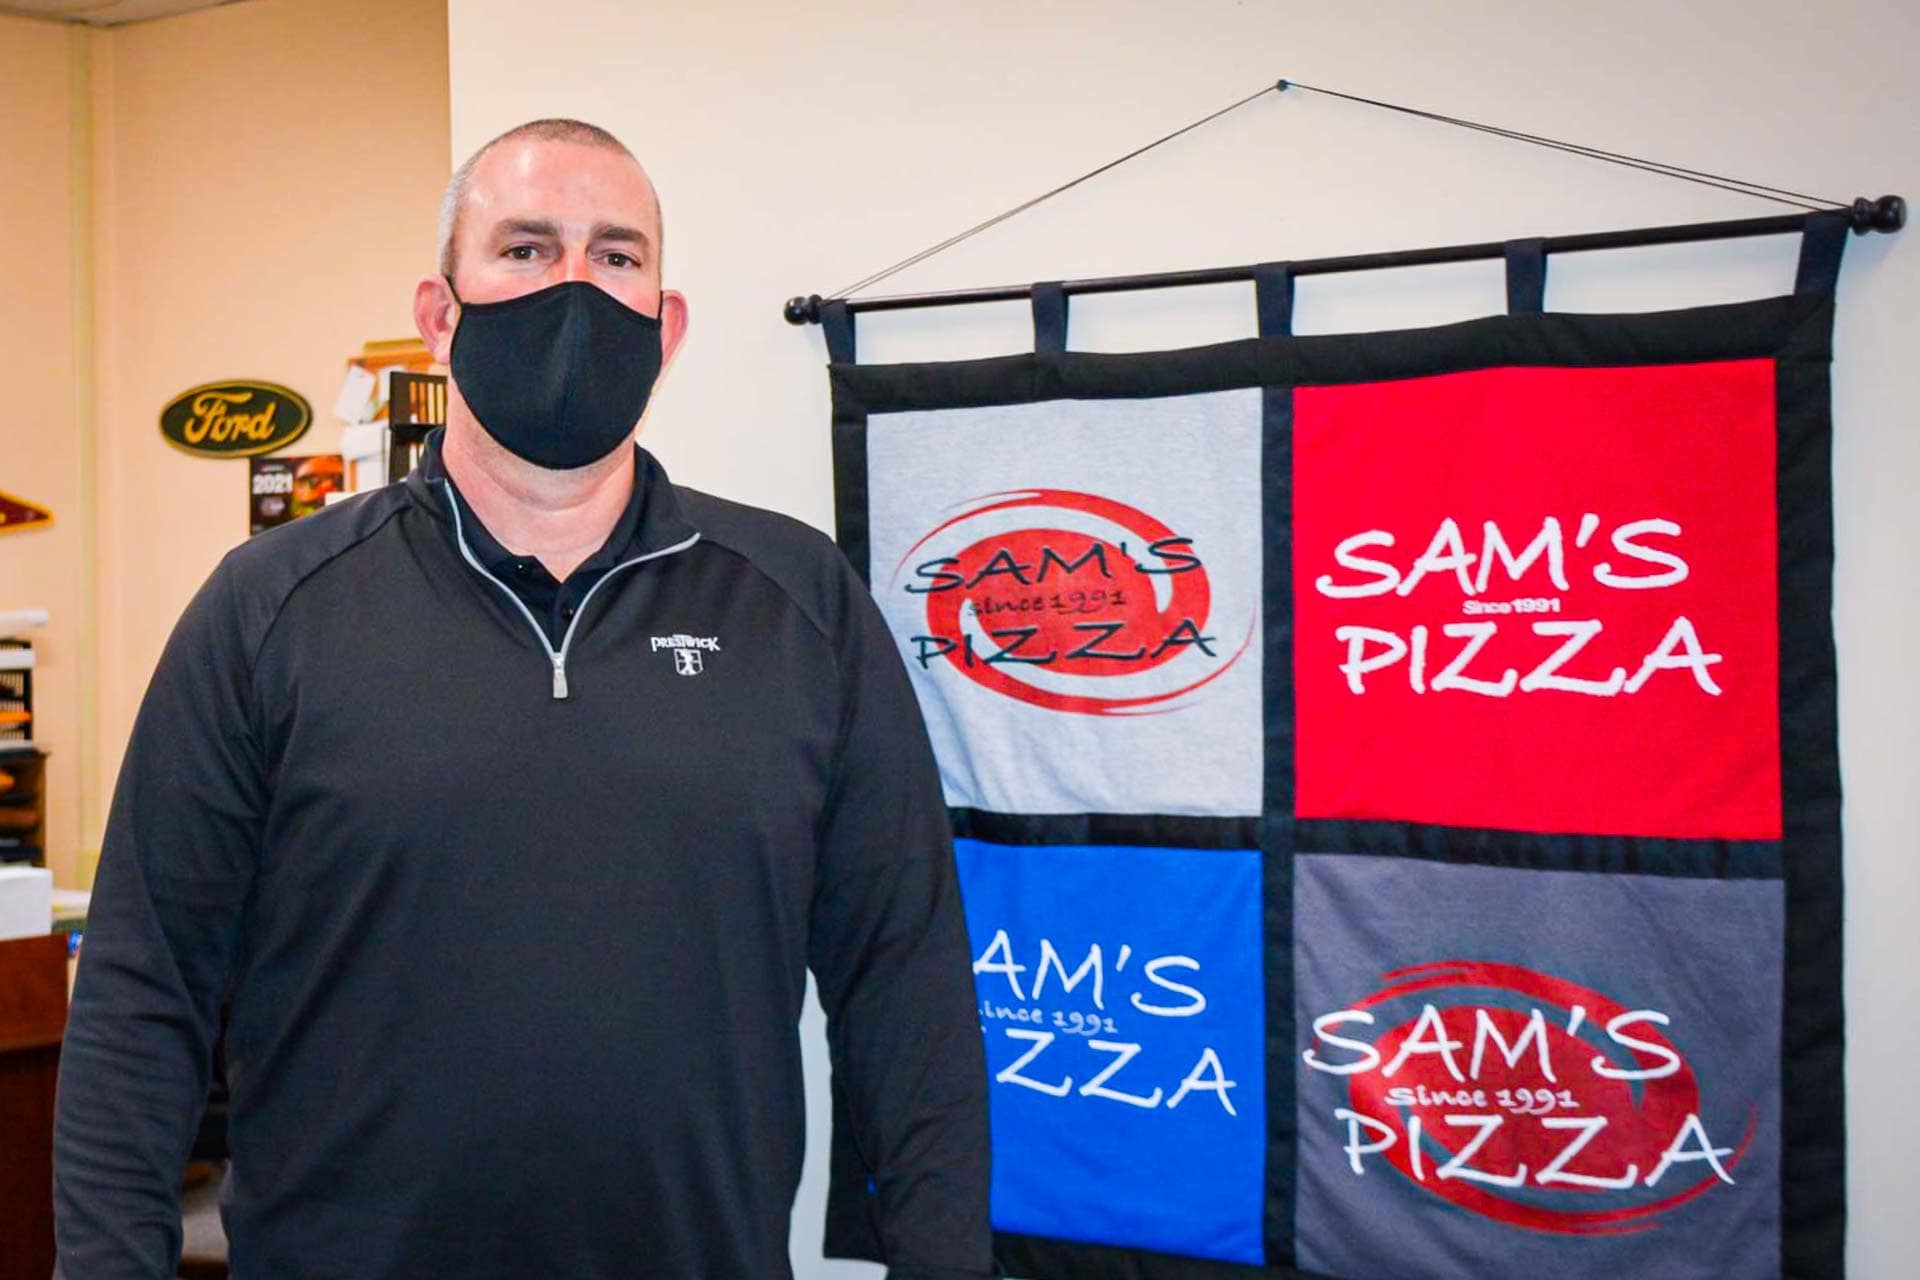 Sam Nolte moved to Buckhannon and started Sam's Pizza when he was just 18 years old. Now, the pizzeria is an Upshur County staple.